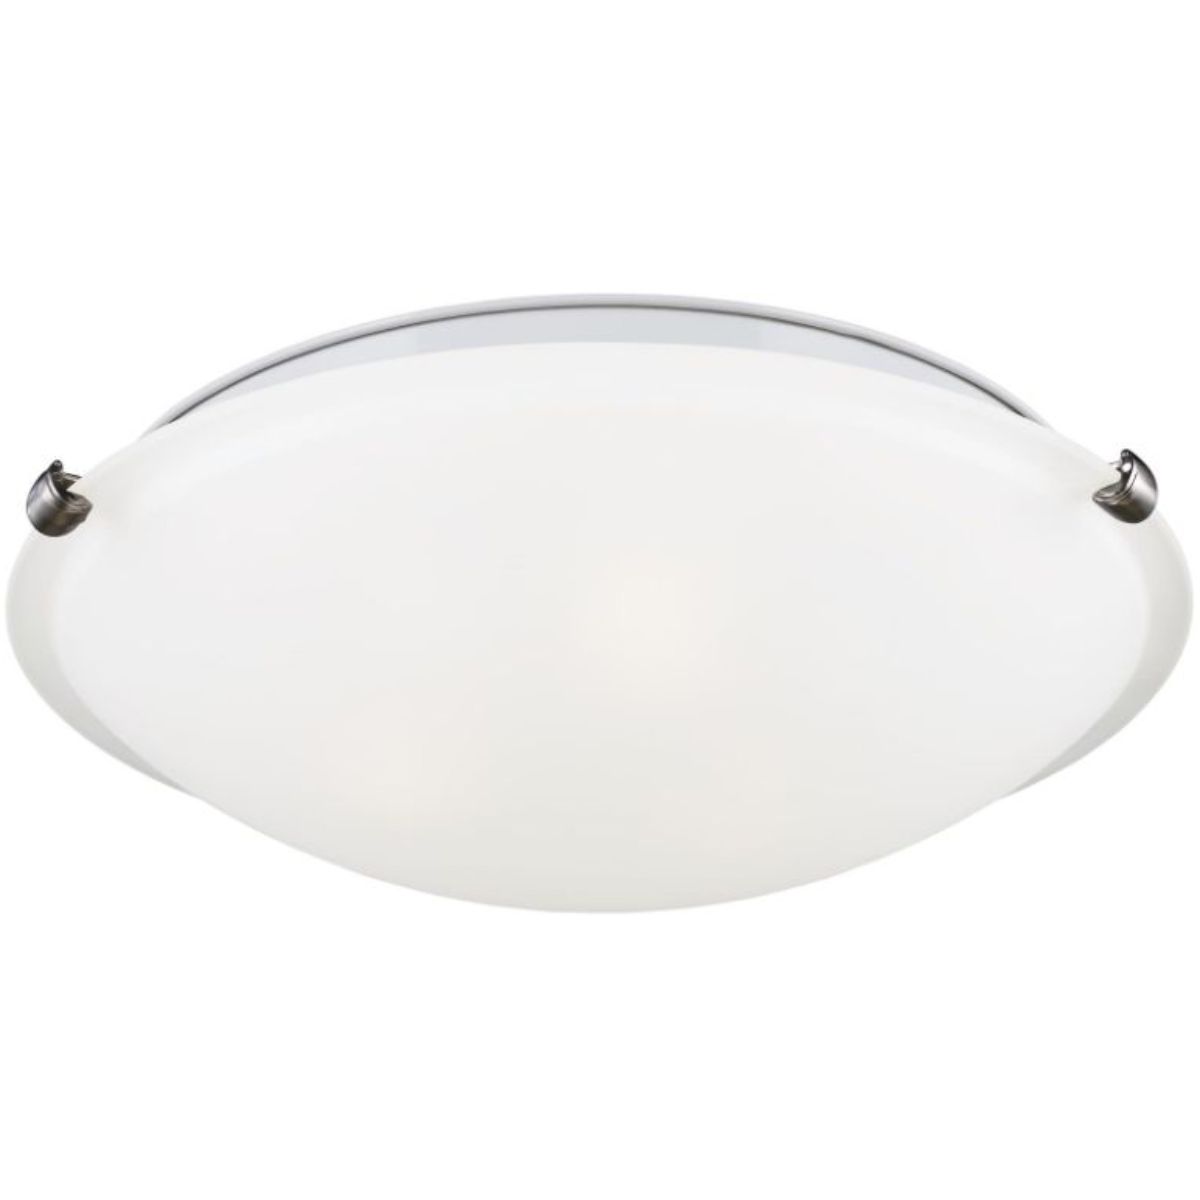 Clip 16 in 3 Lights Ceiling Puff Light Satin Etched glass diffuser Brushed Nickel finish